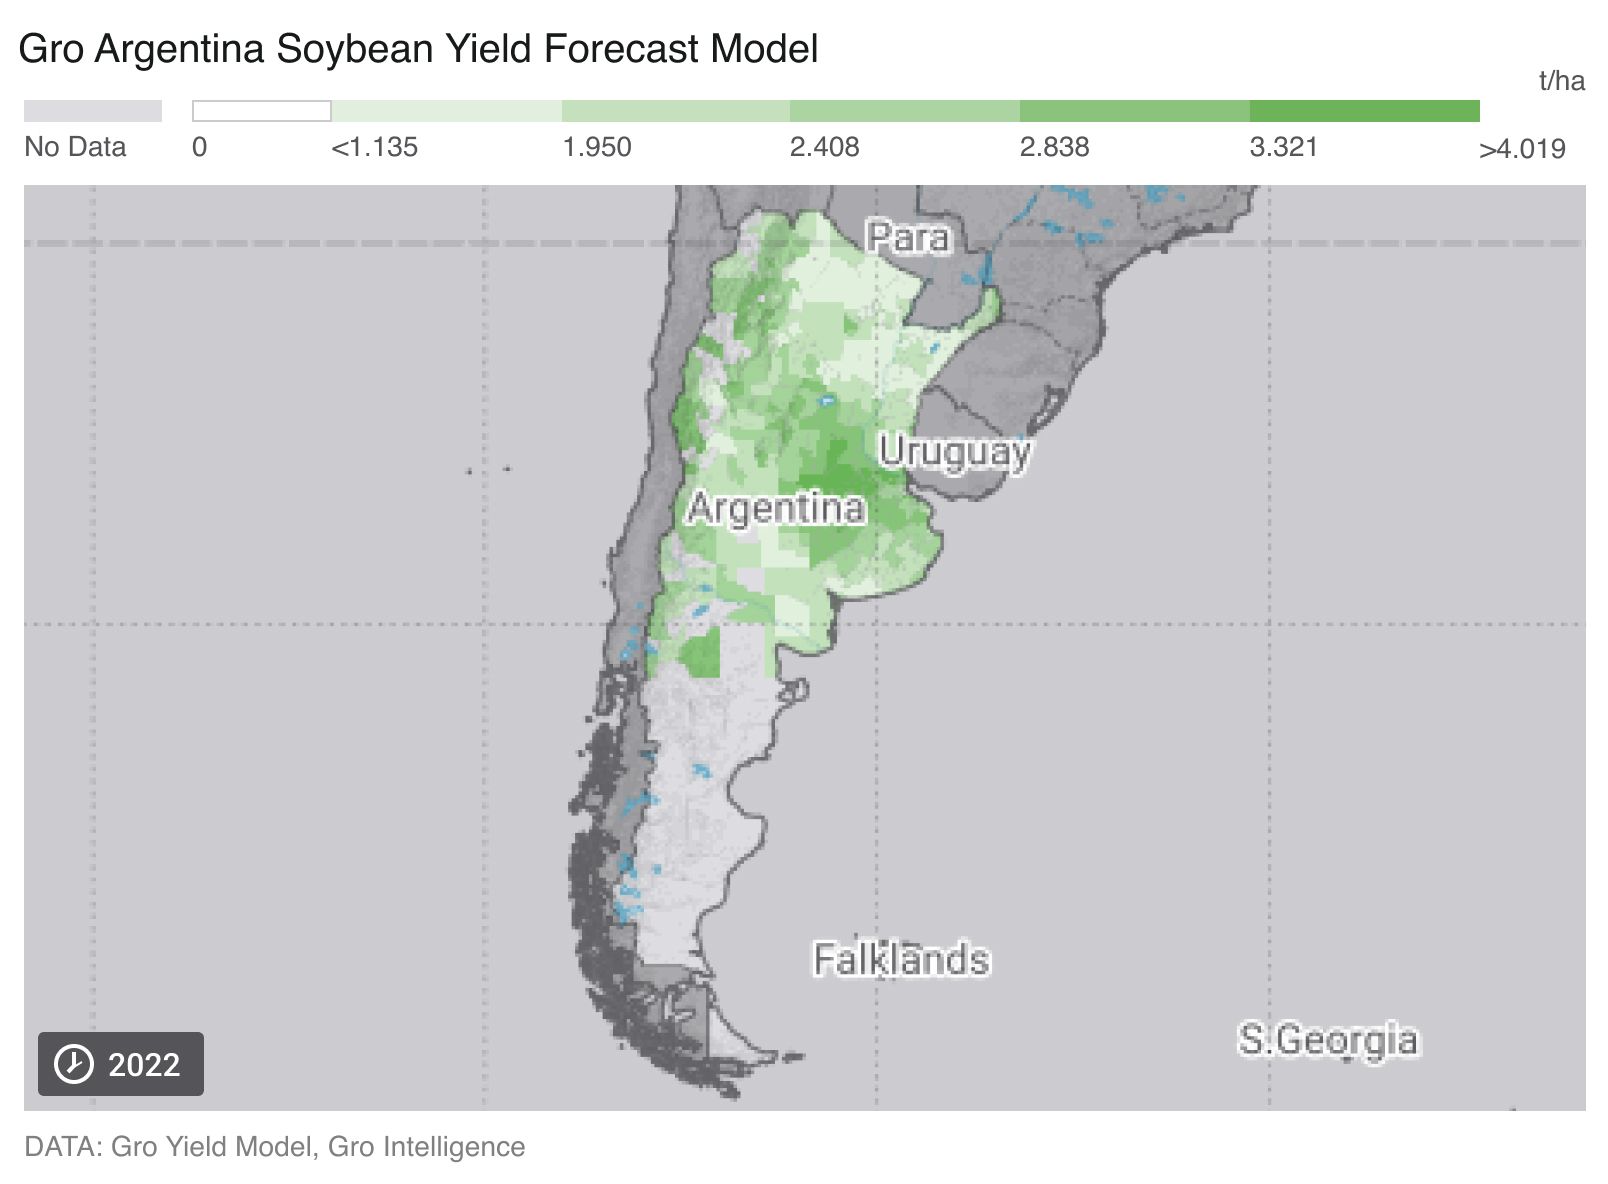 Argentina Soybean Rebound Will Shore Up Global Vegetable Oil Supplies